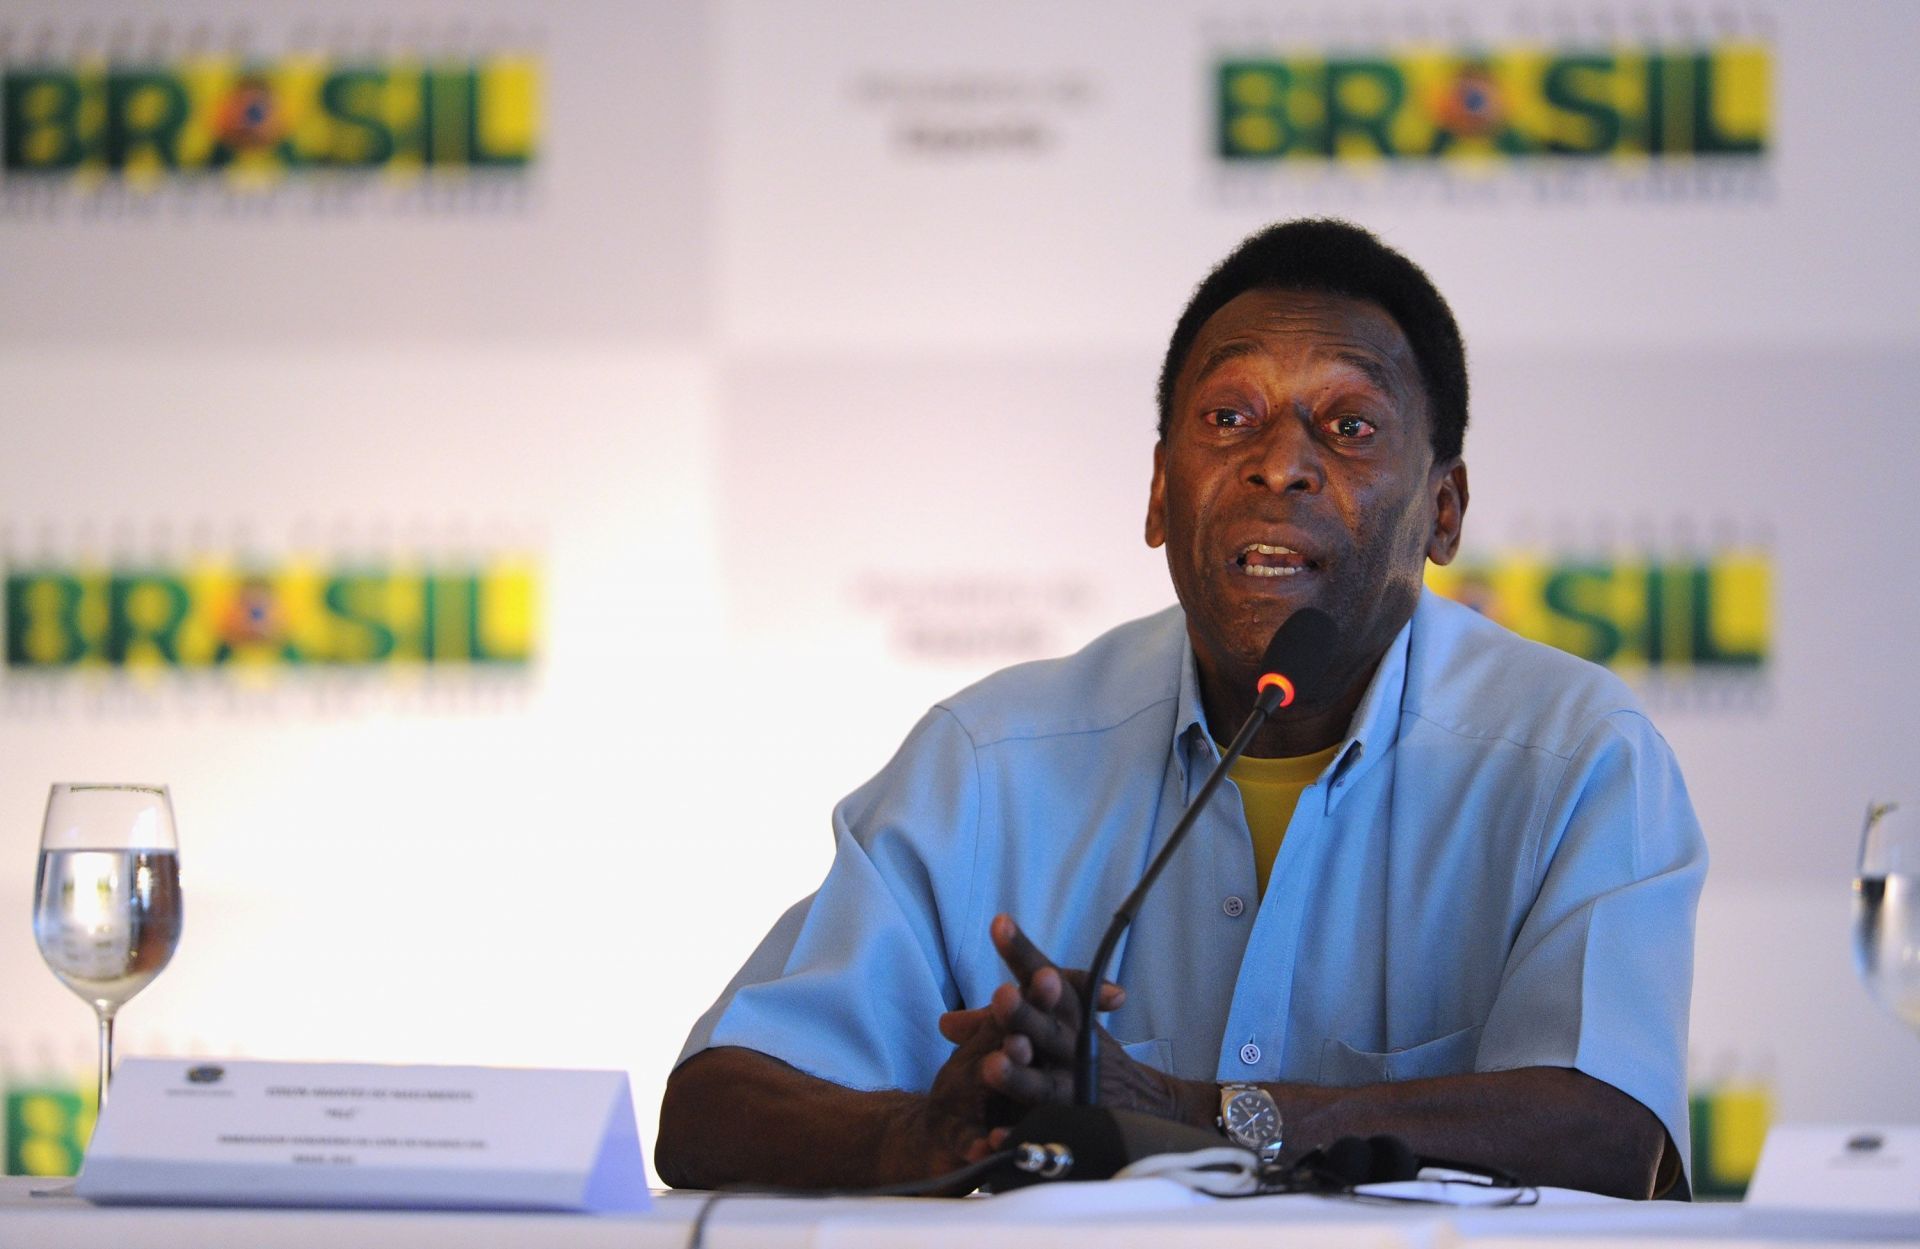 Out of Brazil&#039;s five World Cup triumphs, Pele was part of three